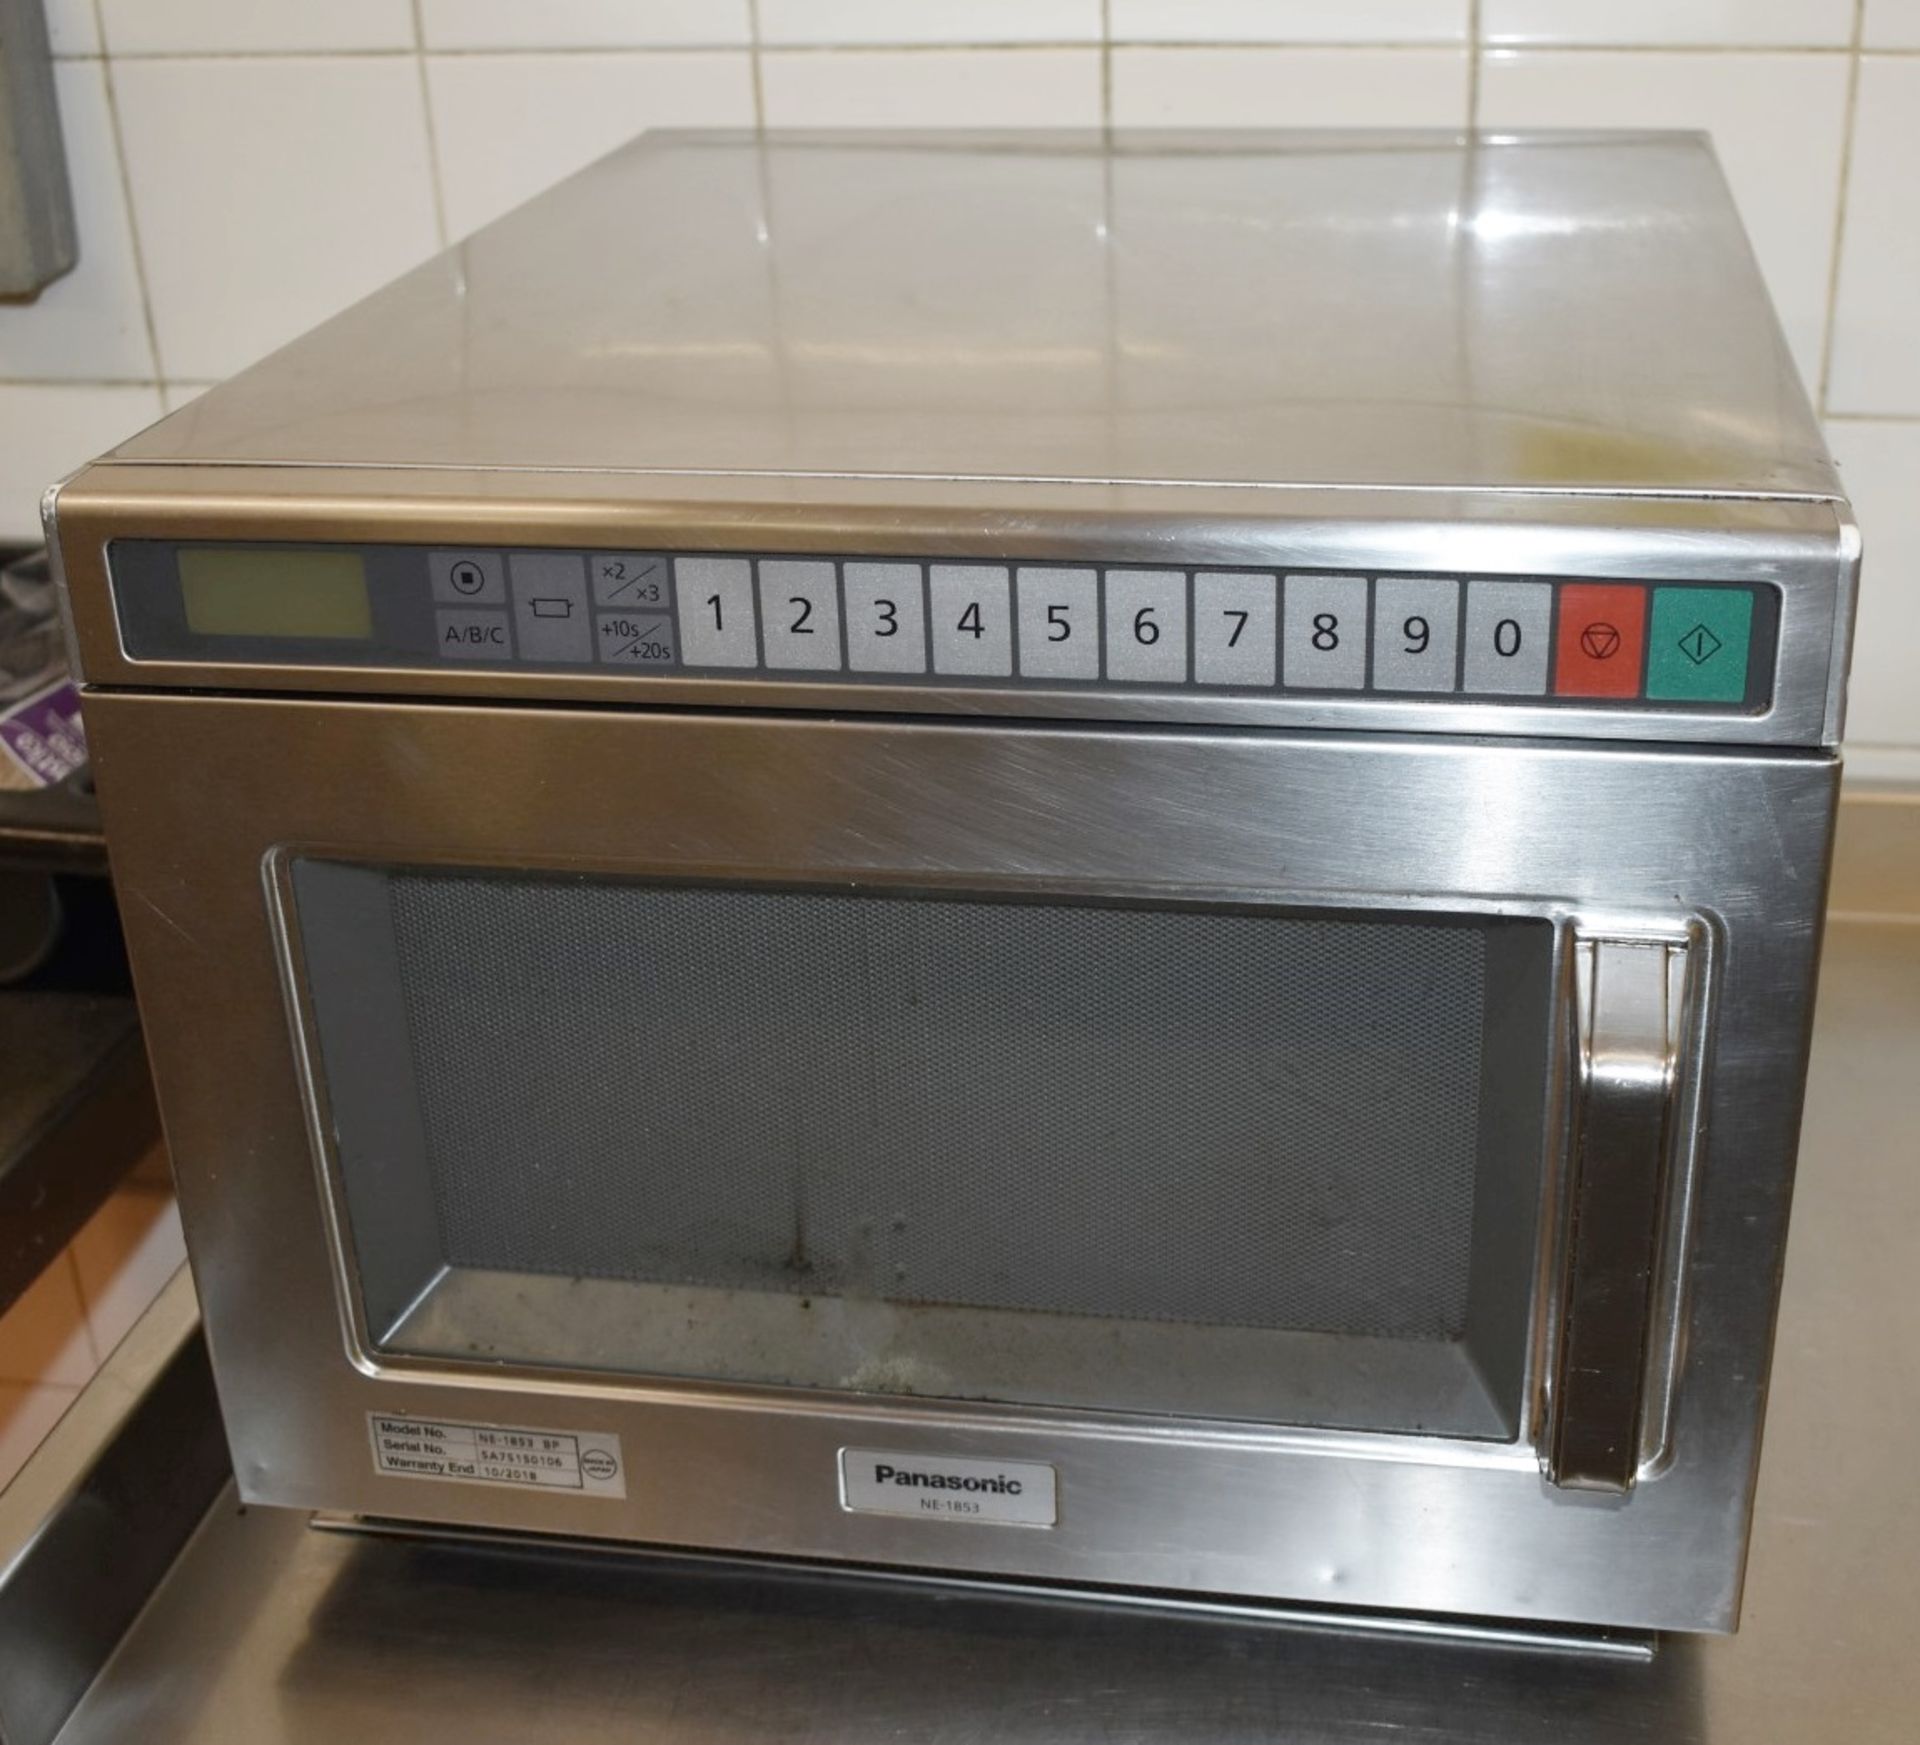 1 x Panasonic NE-1835 Commercial Microwave Oven With Stainless Steel Exterior - 240v - Ref C509 - CL - Image 4 of 4